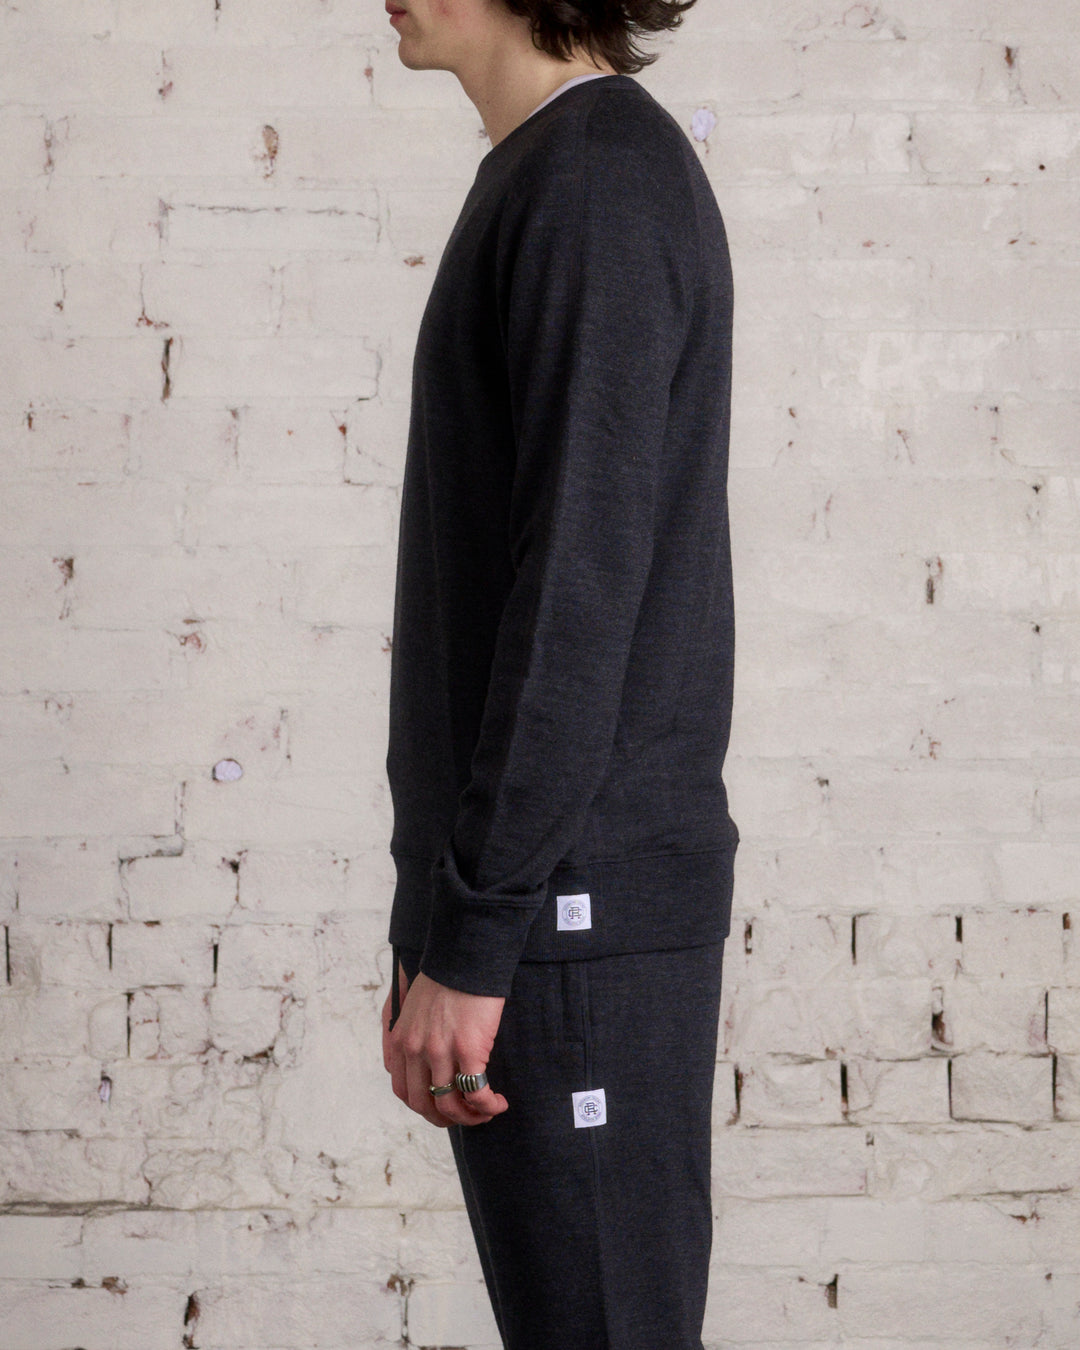 Reigning Champ Knit Merino Terry Crewneck Charcoal